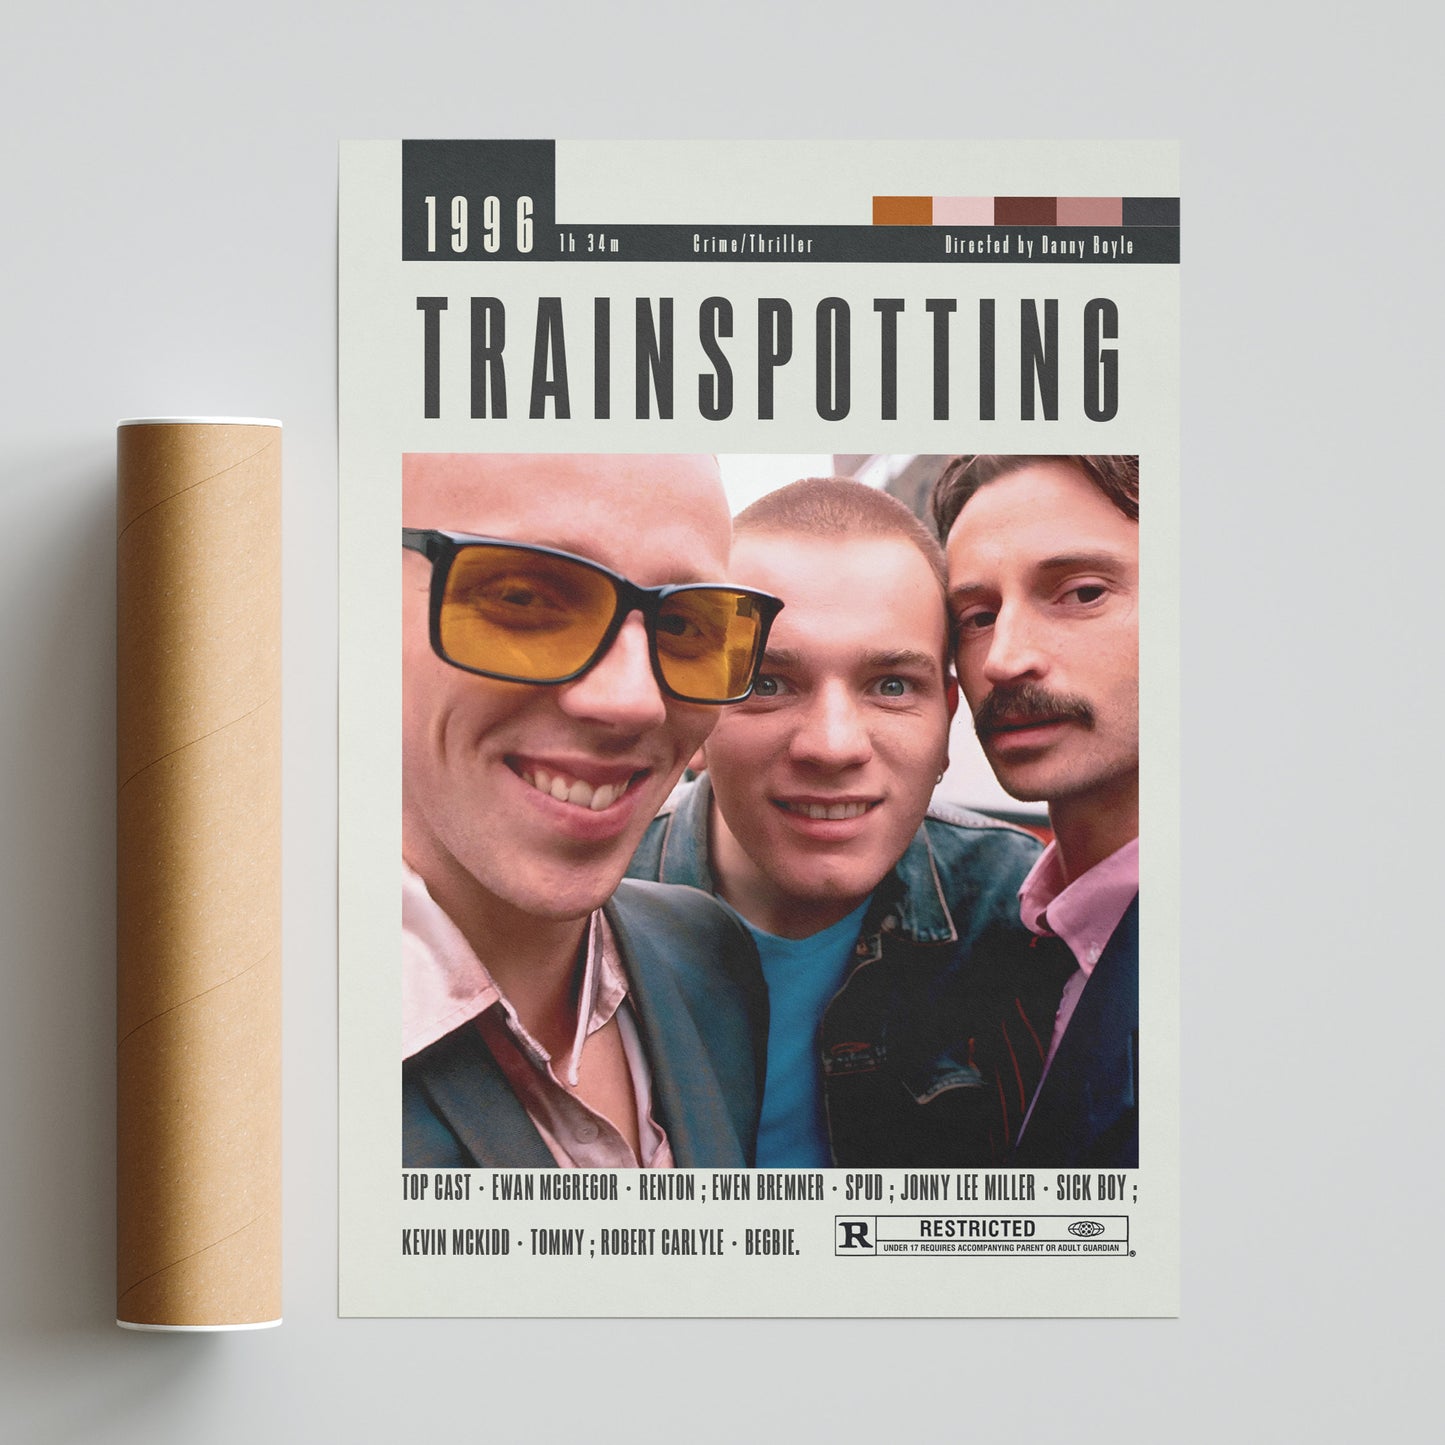 "Choo choo! Spice up your walls with the coolest movie posters from the UK. Our handmade illustrations will make you want to watch your favorite Danny Boyle movies on repeat. Get the best selection of posters, gifts, and prints all in one place. All aboard the Trainspotting Poster!"